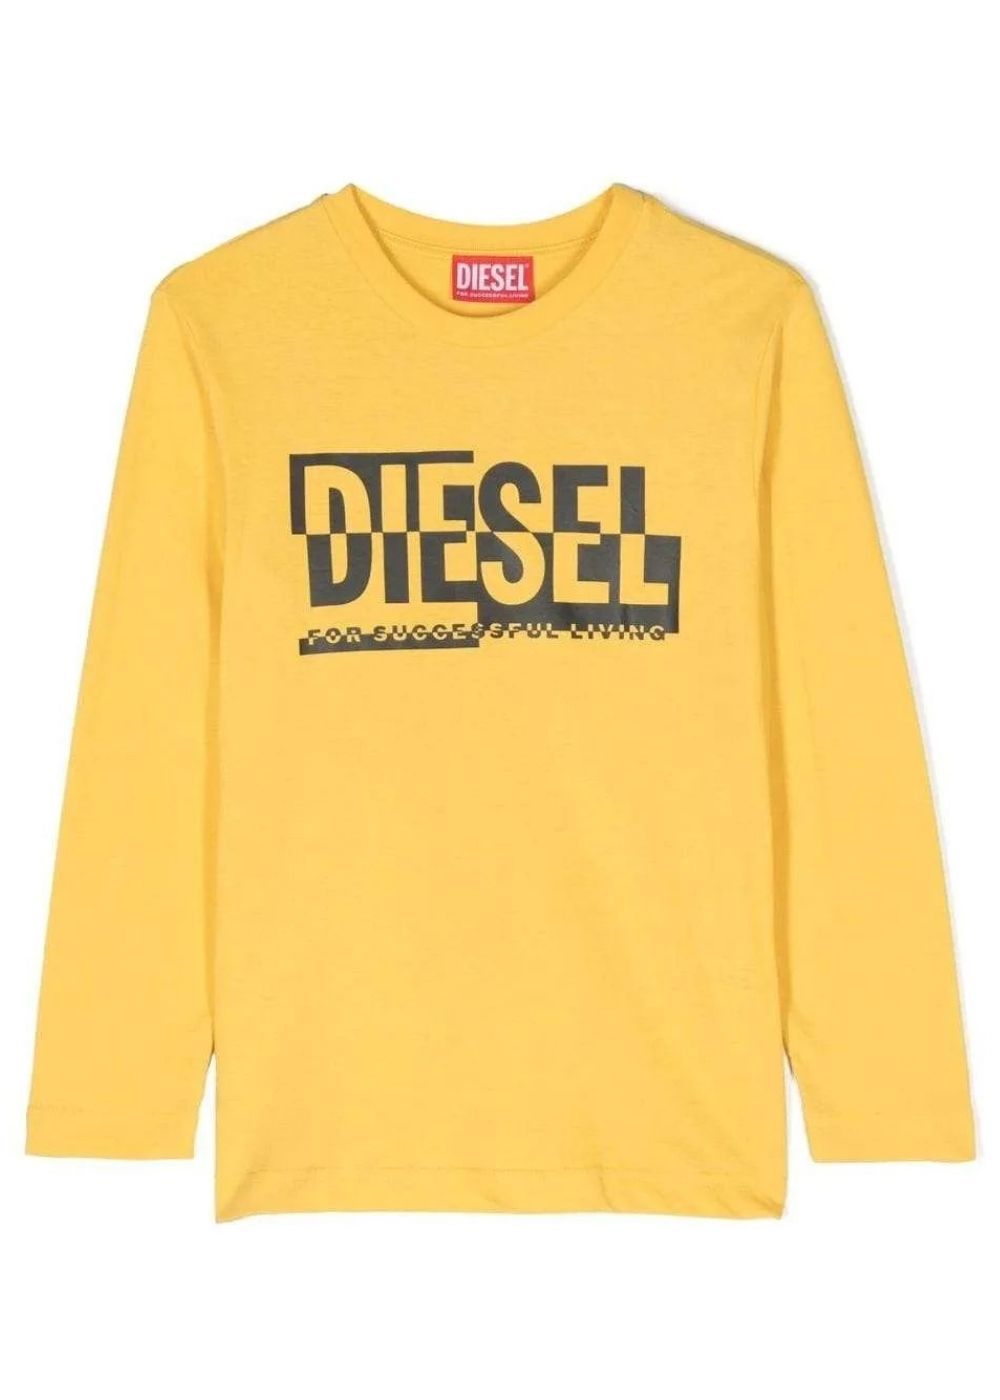 Featured image for “Diesel T-shirt Maniche Lunghe”